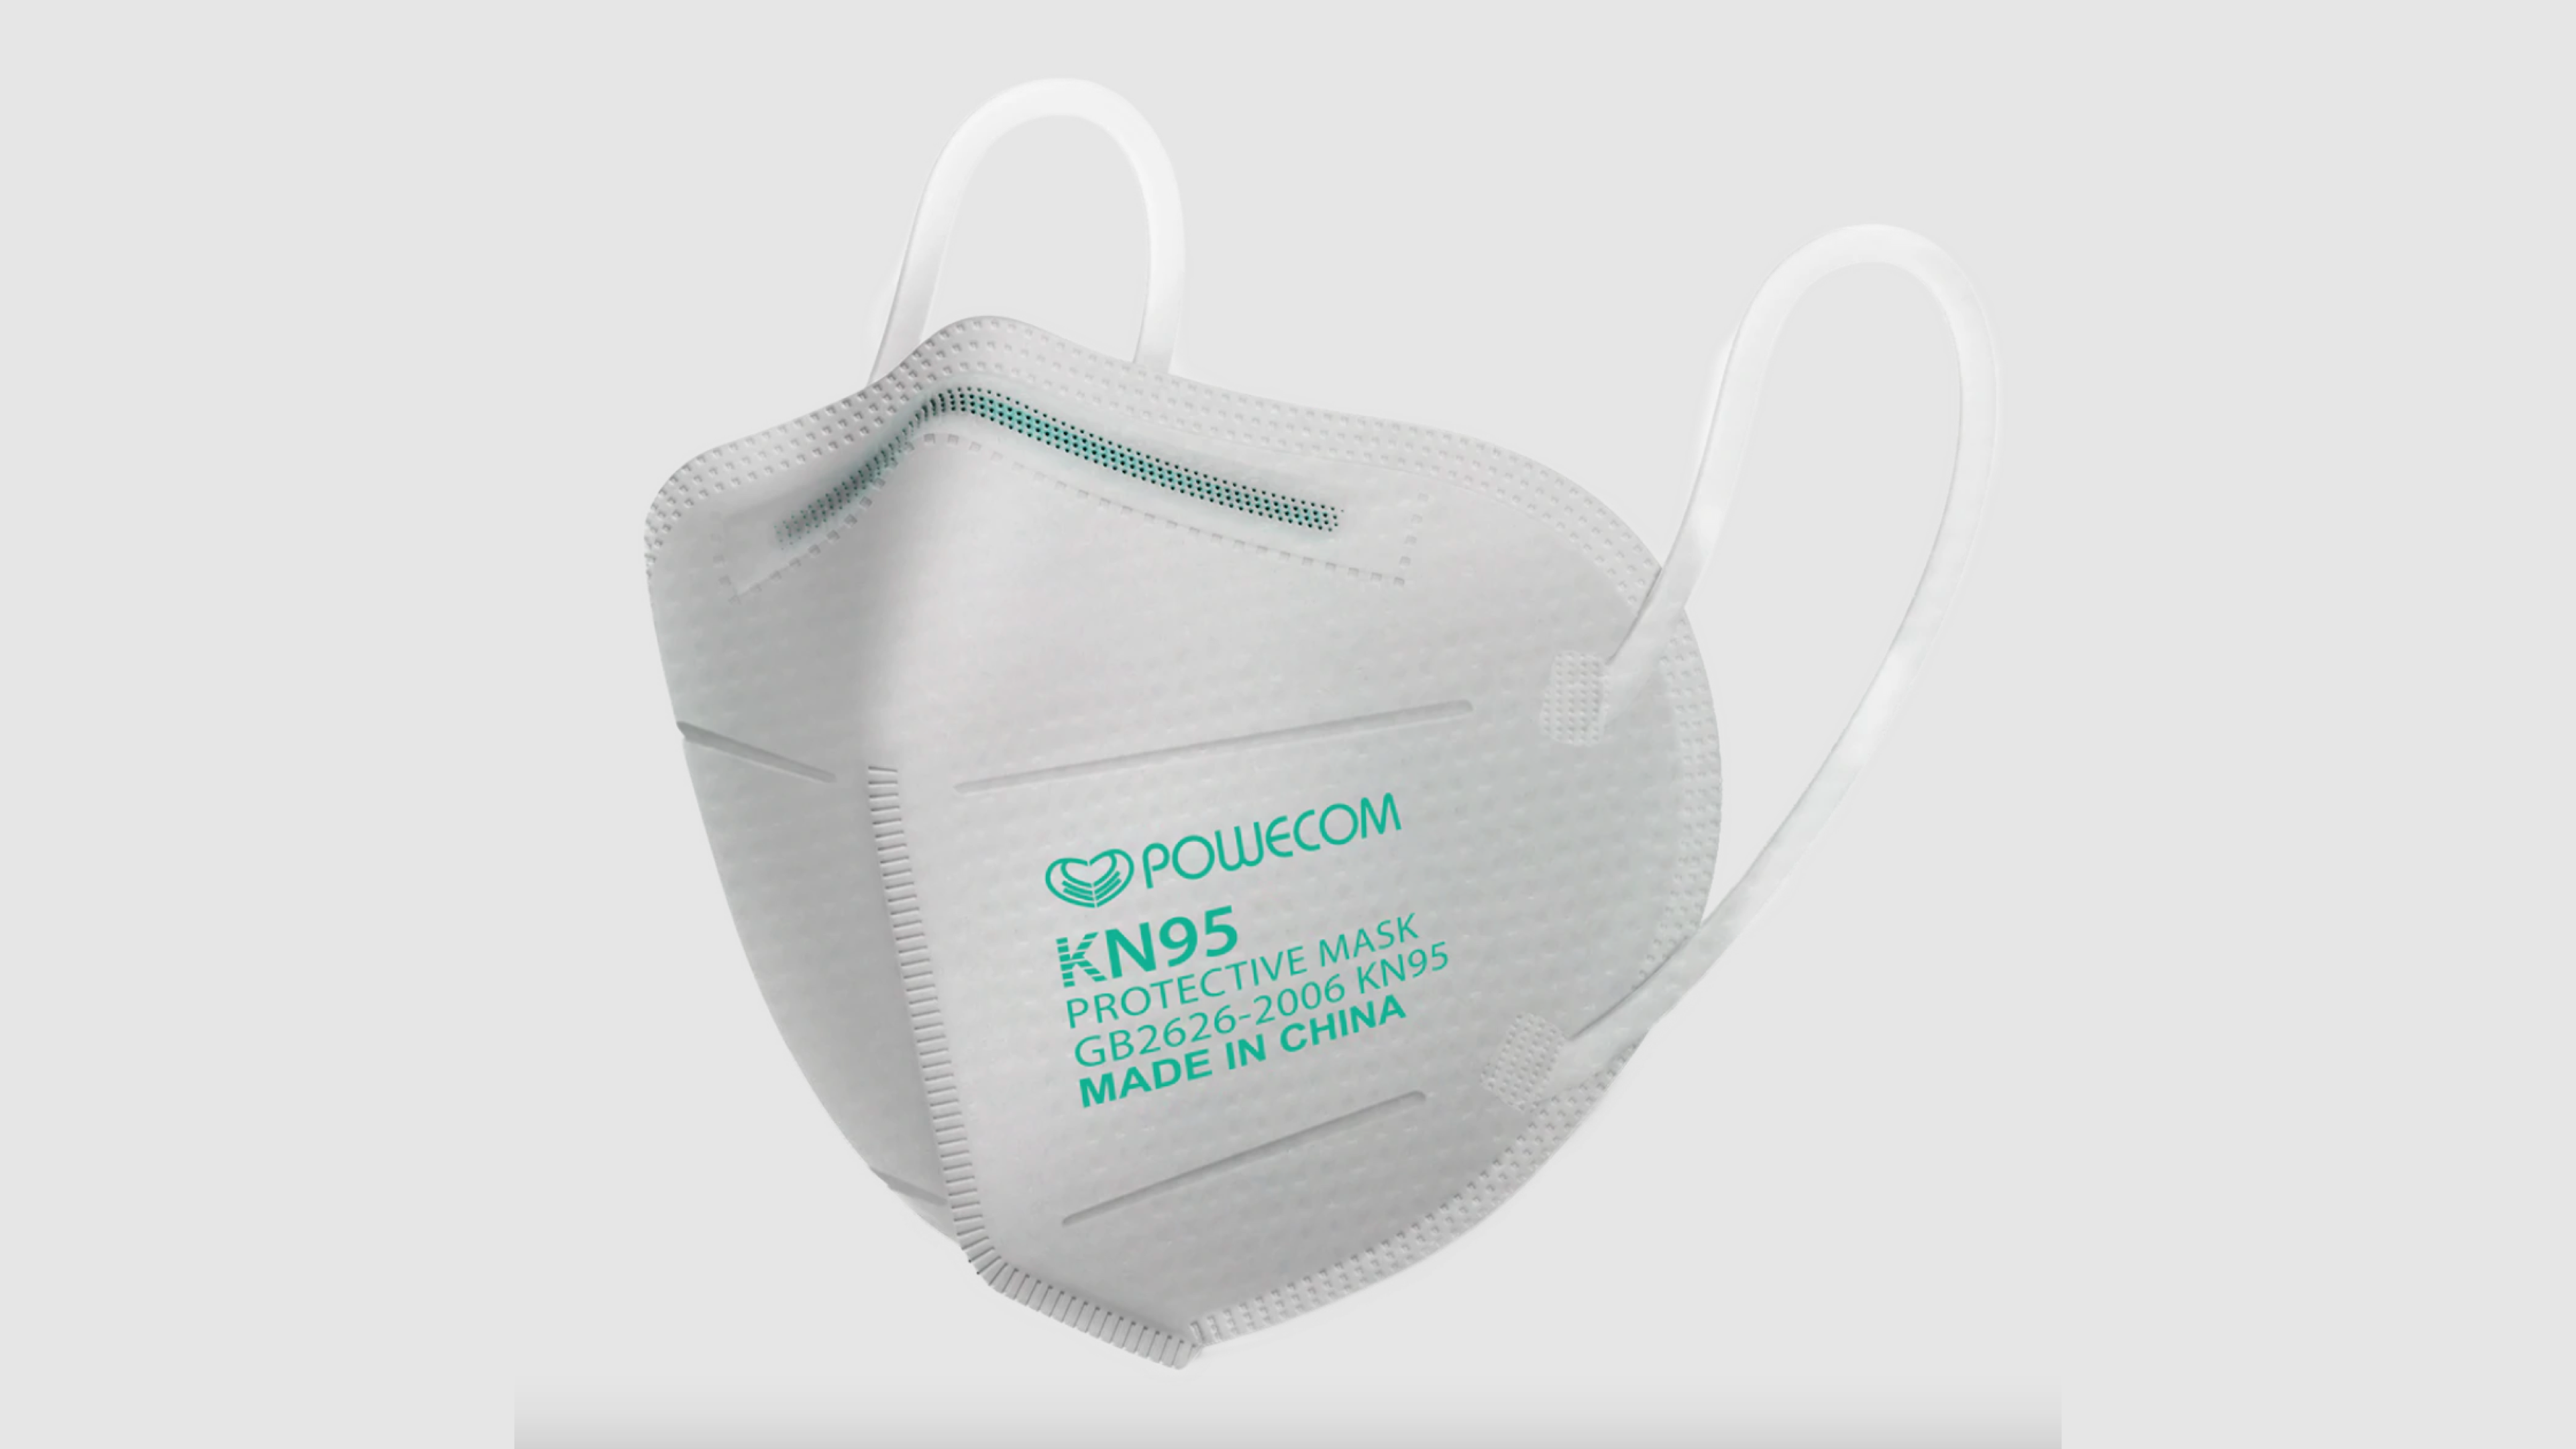 KN95 respirator face mask for protection against the spread of covid-19